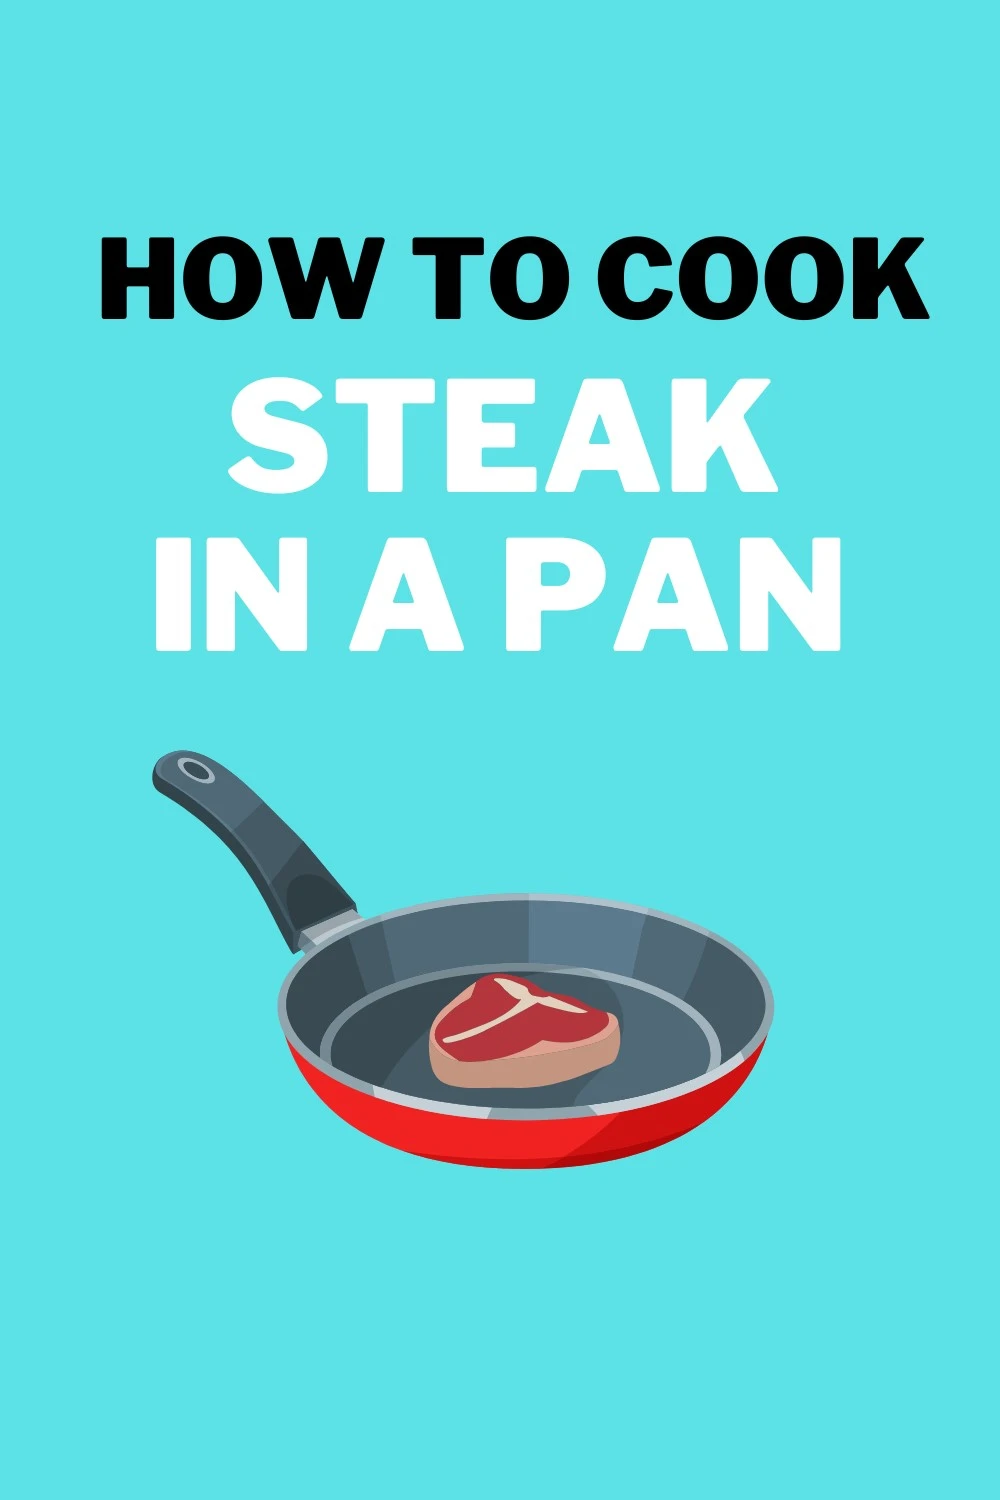 how to cook steak in a pan with a illustration of a raw steak in a frying pan